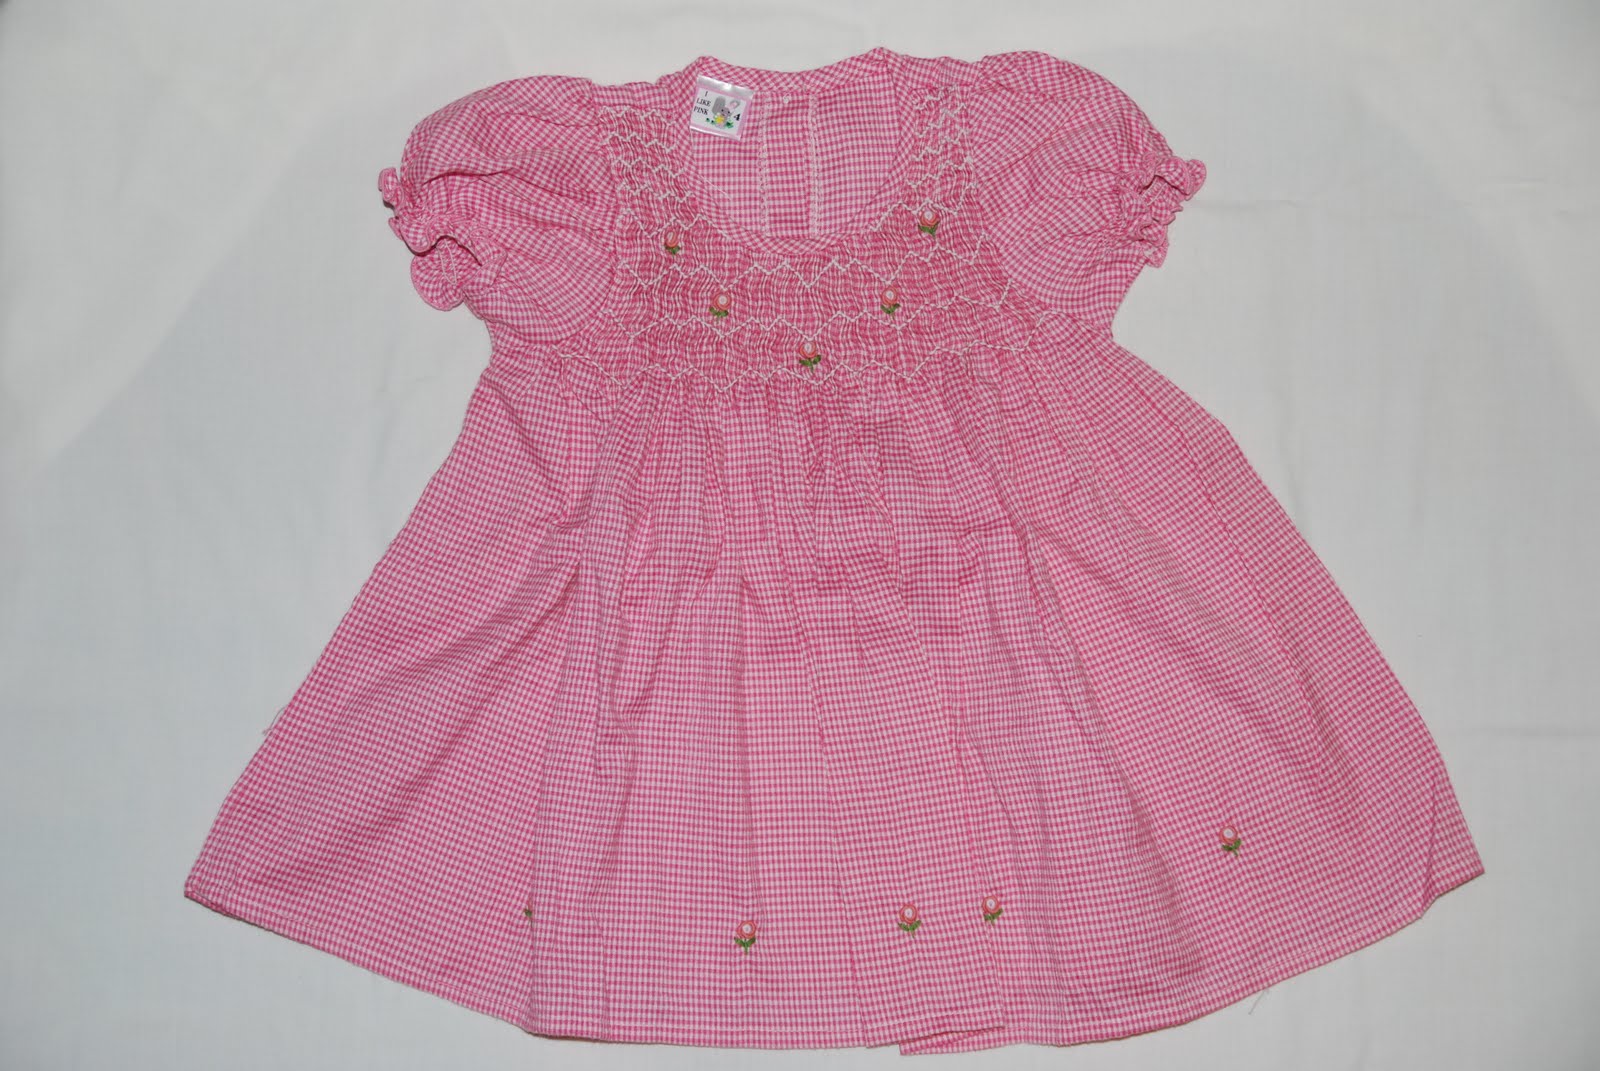 Children Pre-loved items: Pink Smoking Dress Size 4 (1-2Y)